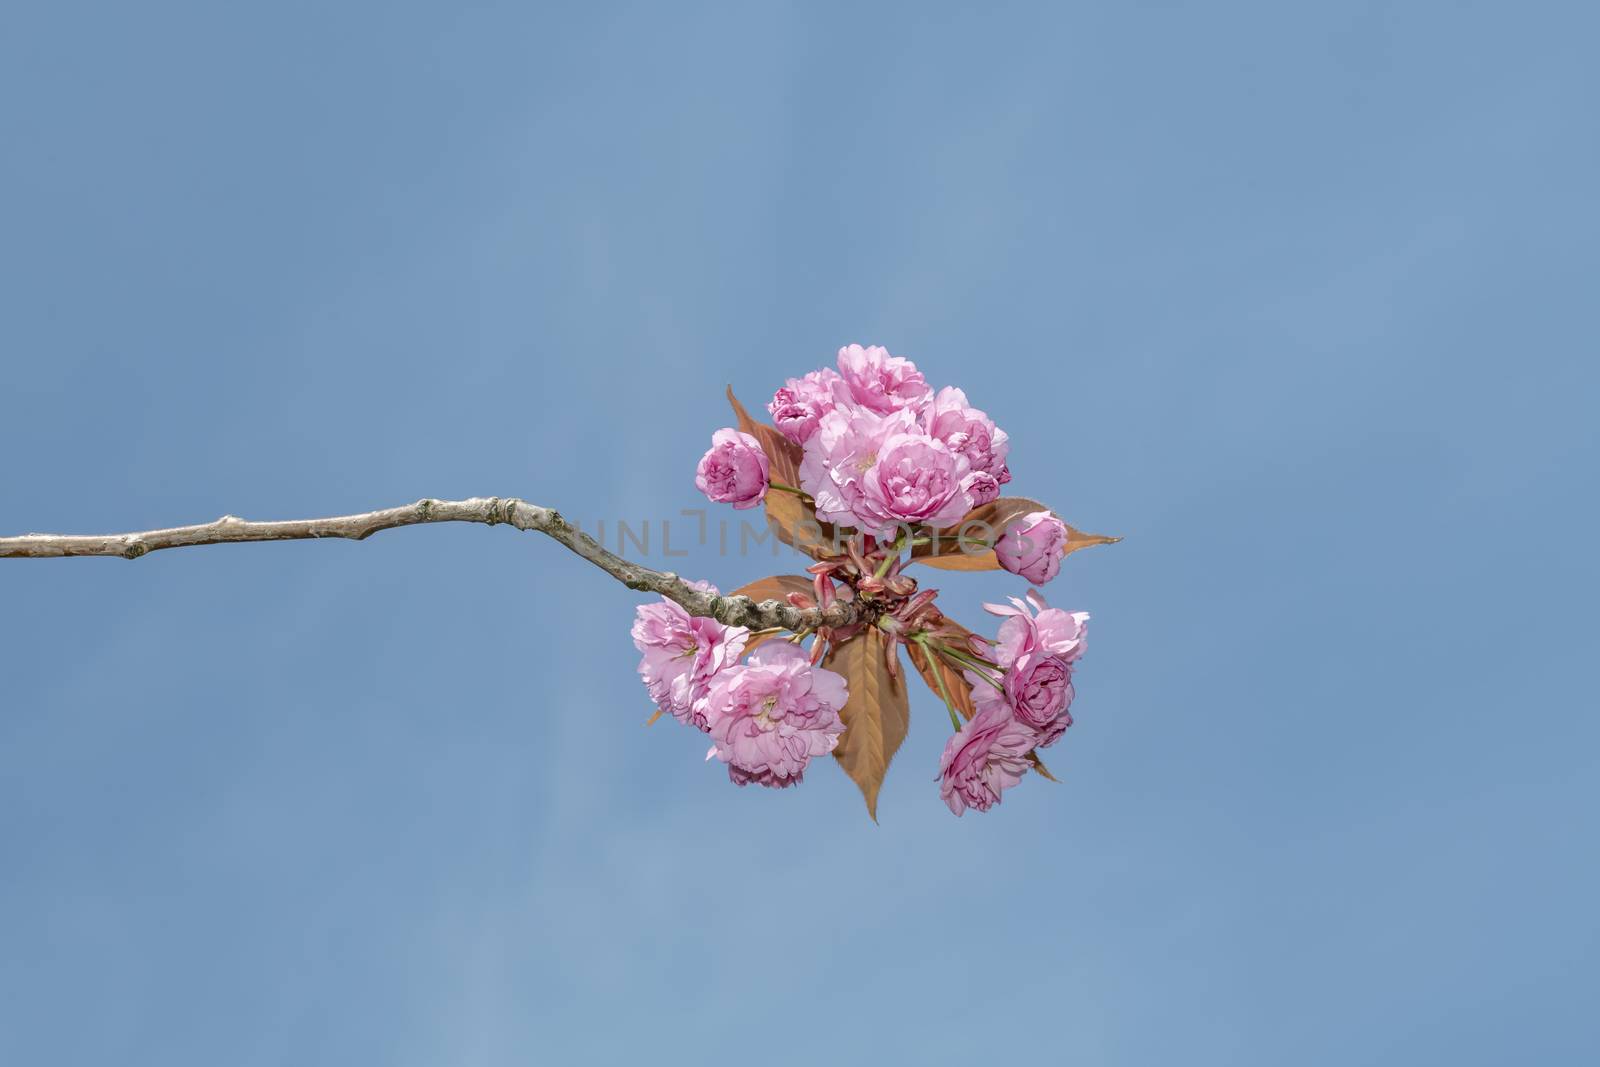 Young pink Sakura blossom blooming at the end of a branch against a pur blue sky in the spring season by ankorlight